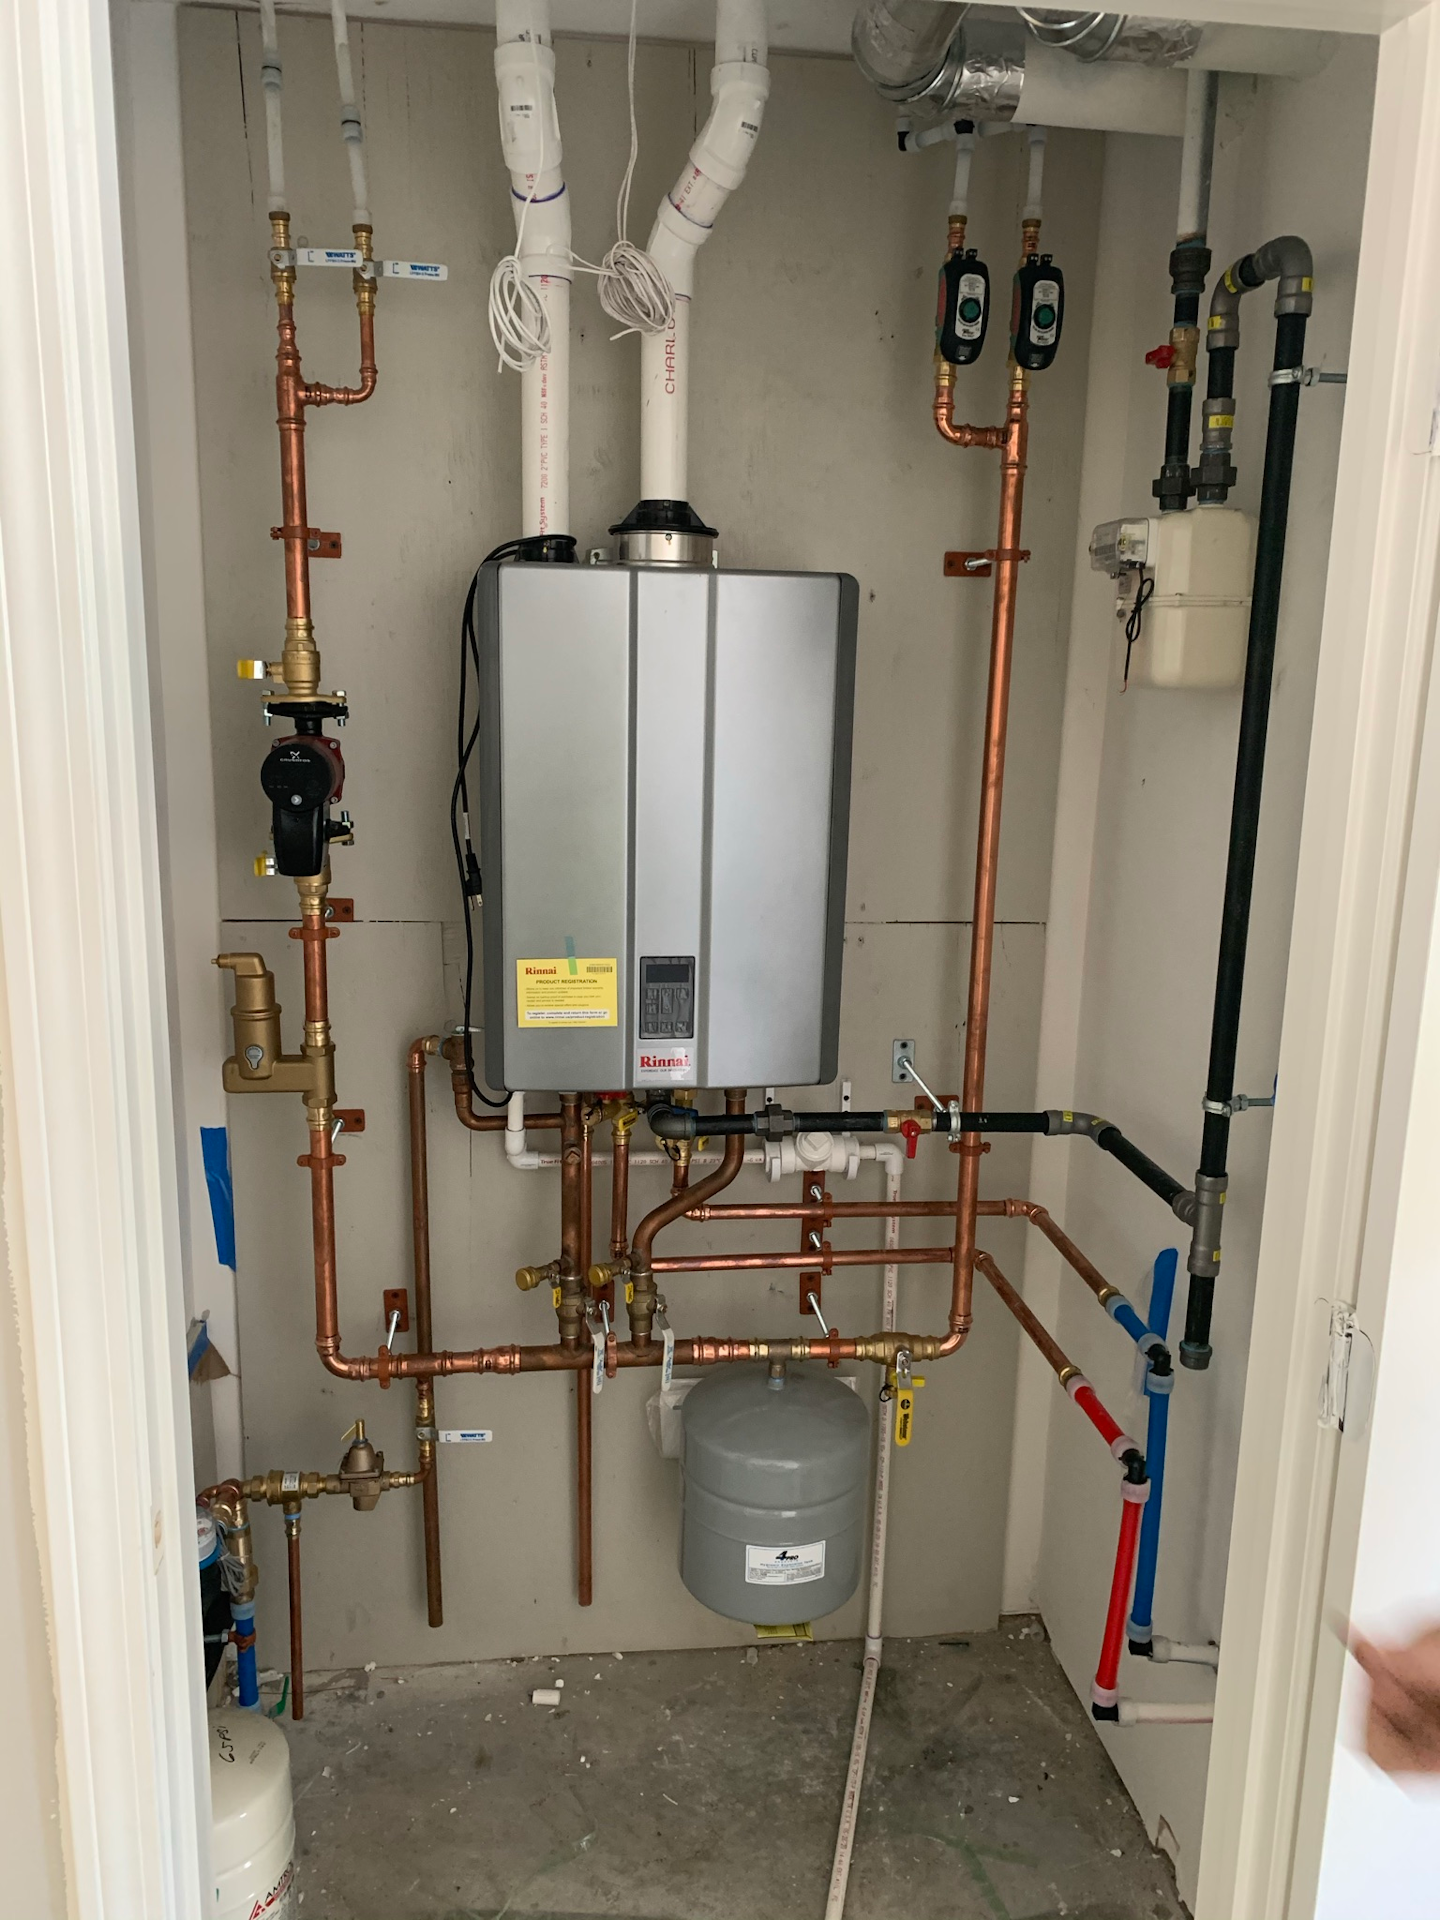 Another of the I-Series units plumbed in a similar configuration with different piping.